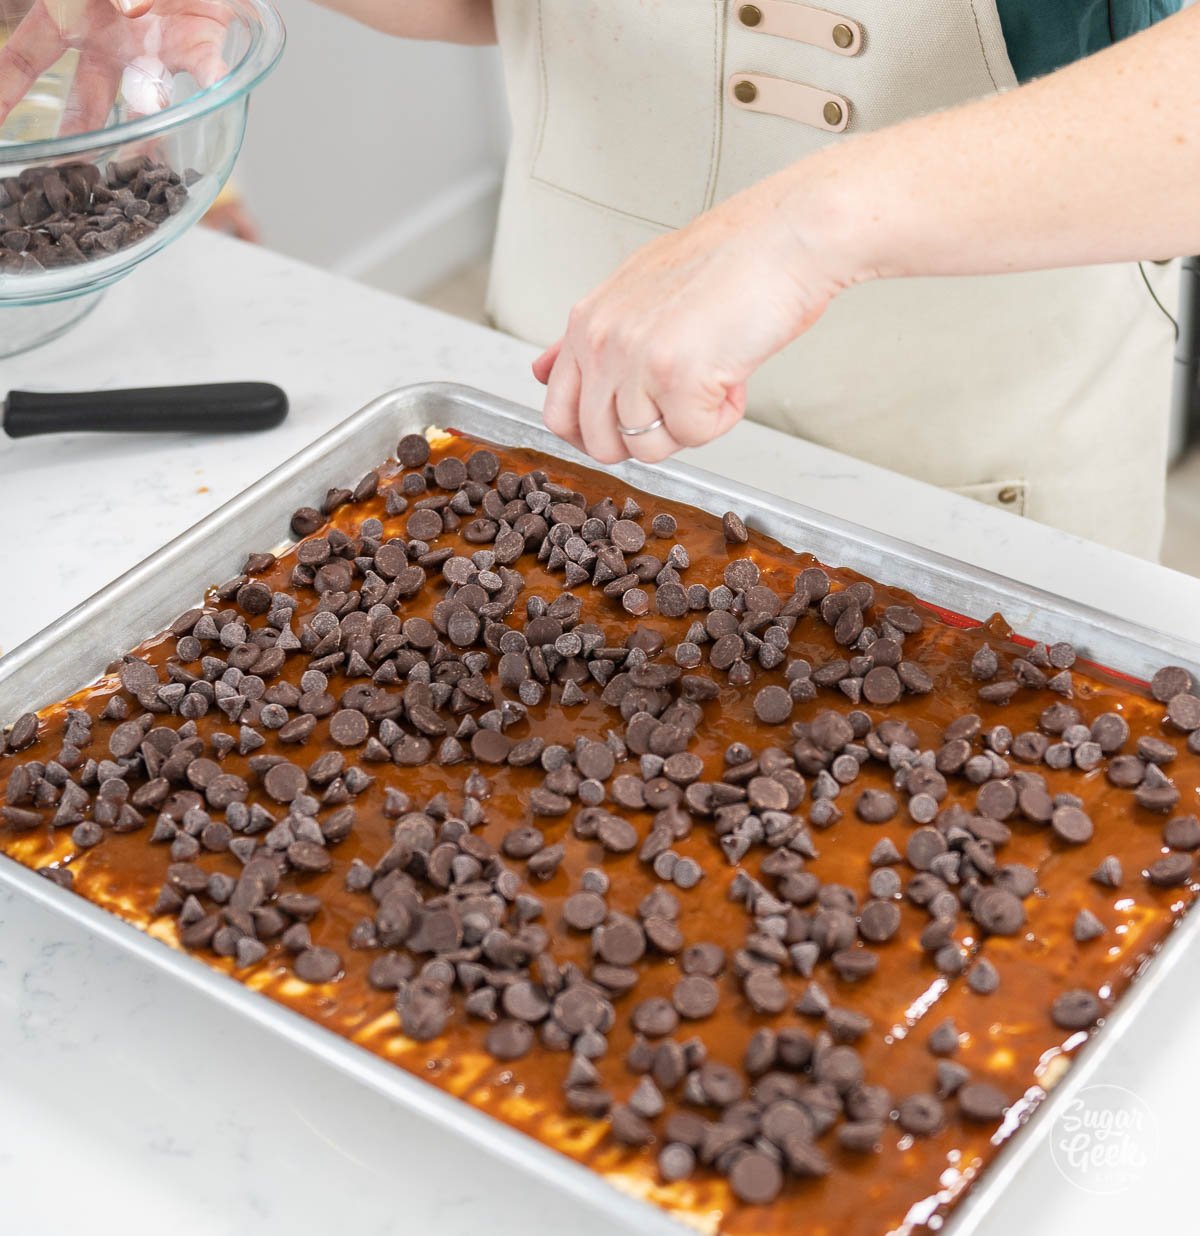 sprinkling chocolate chips onto crackers and toffee